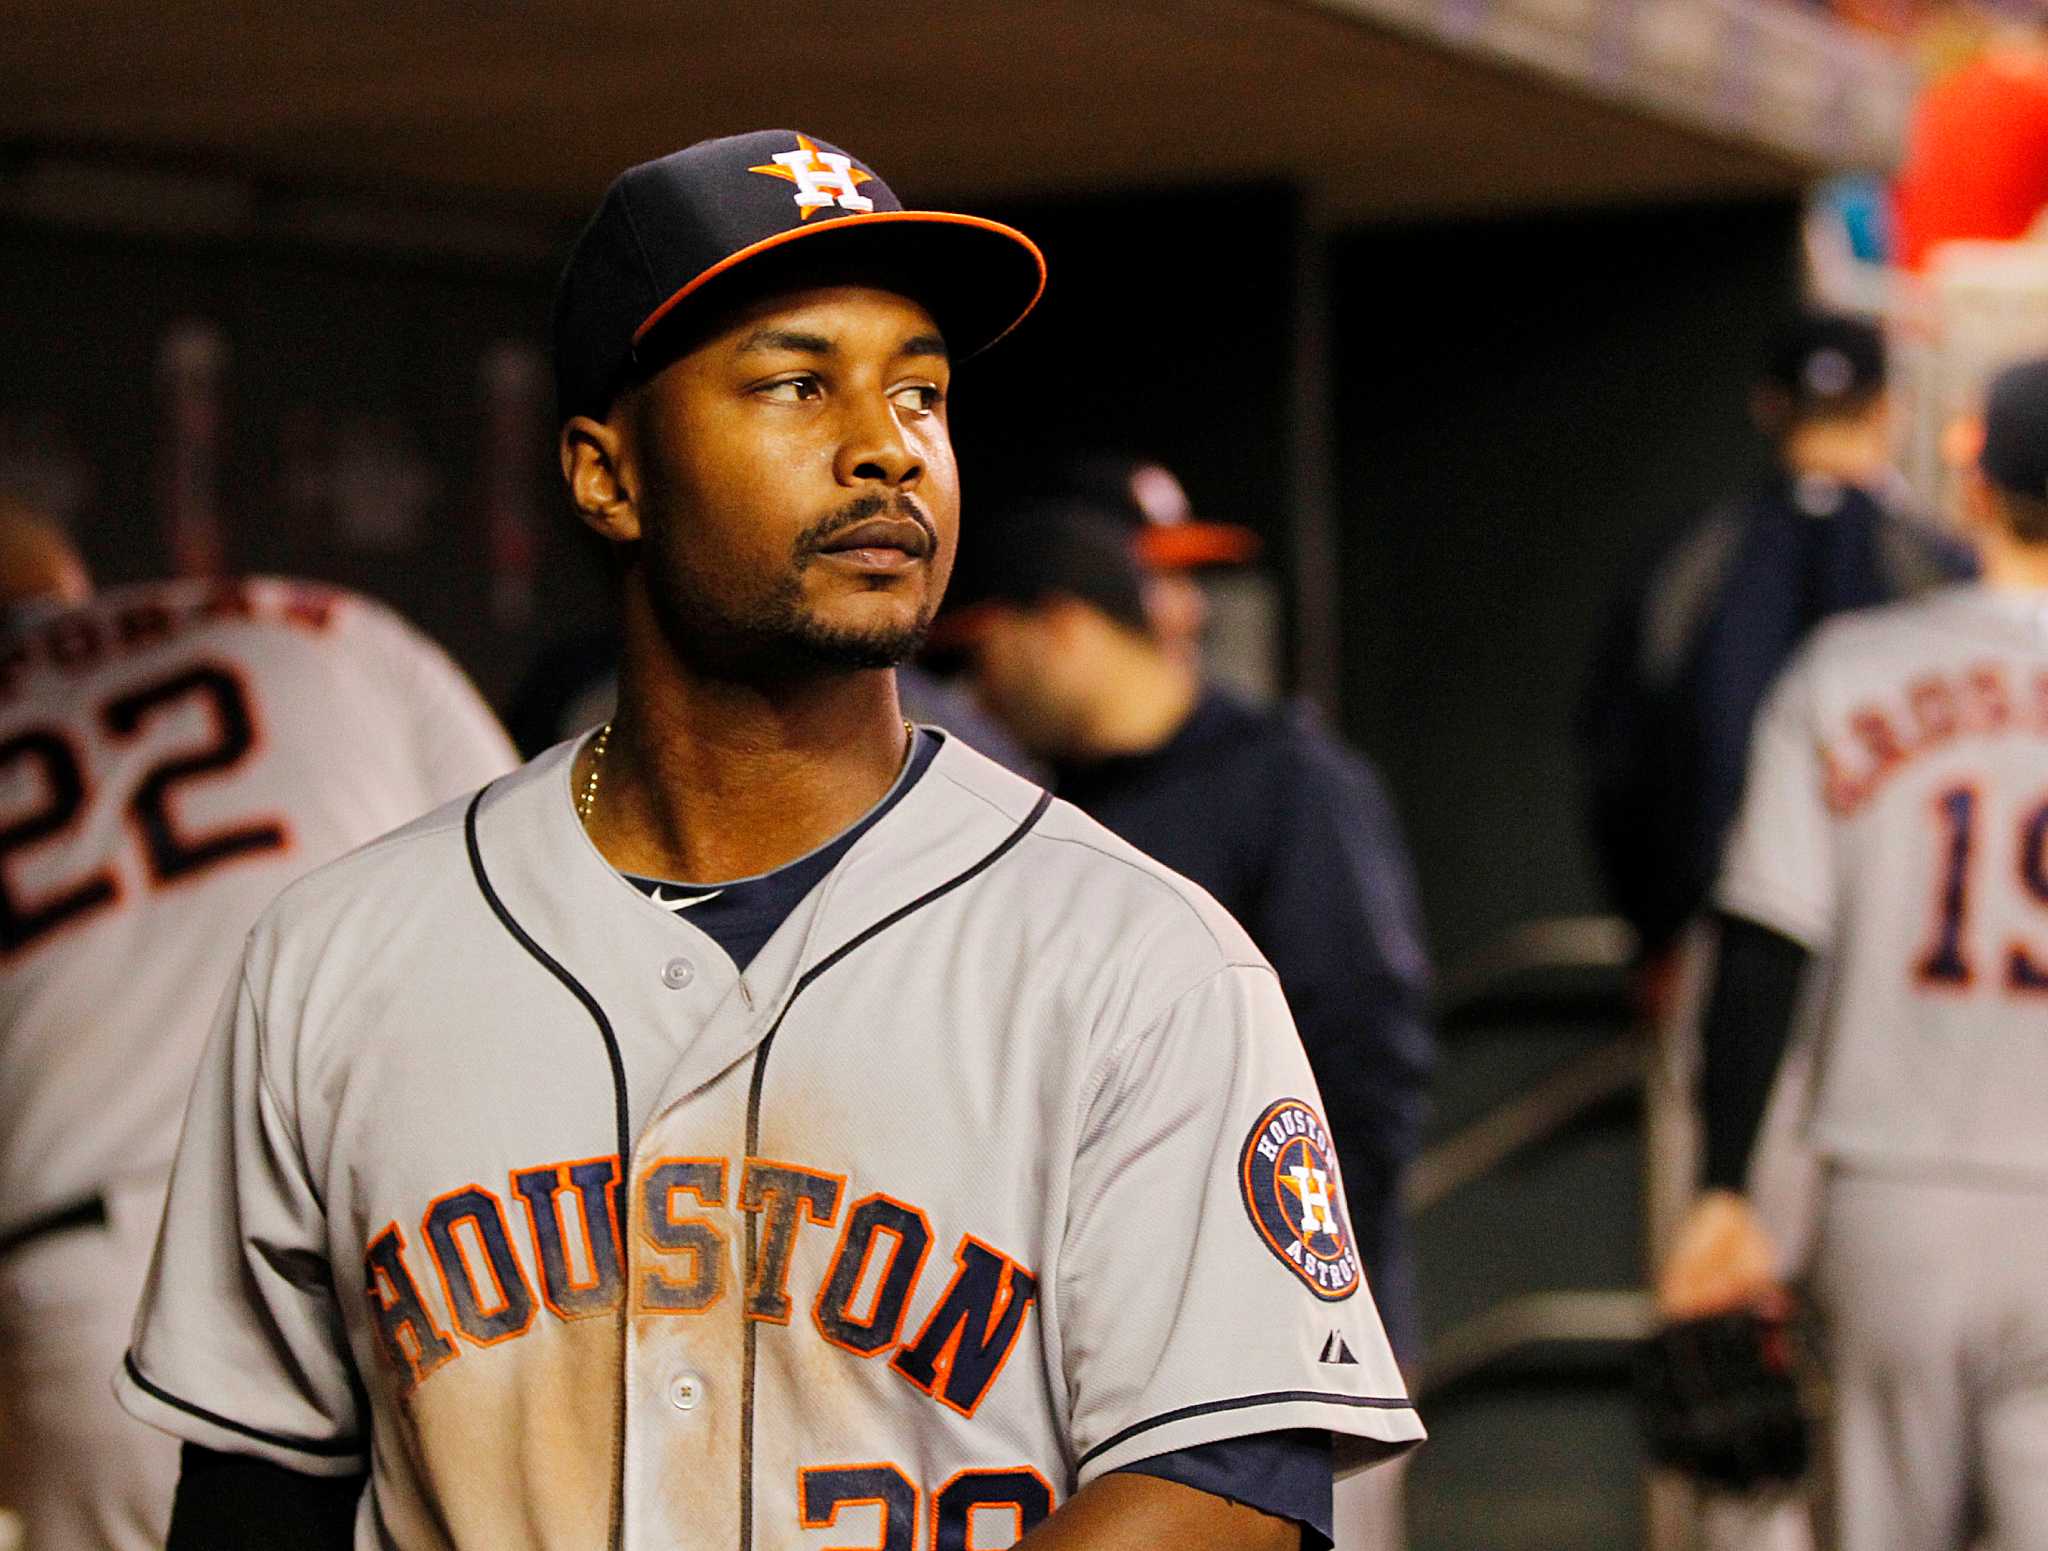 Former Astros outfield prospect L.J. Hoes garners win in AAA game